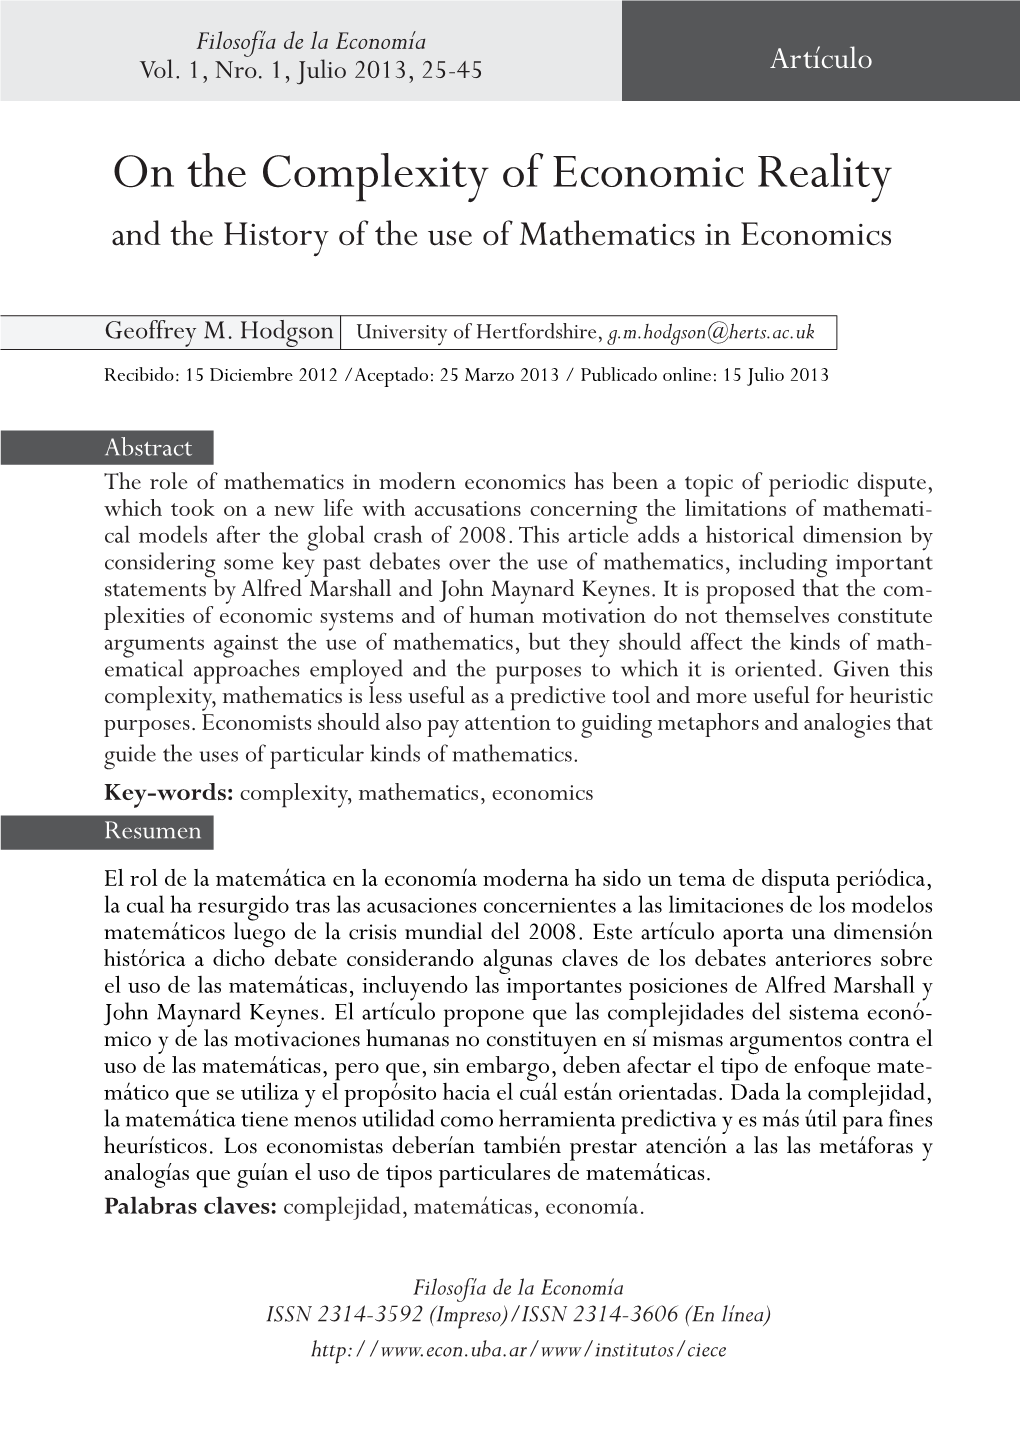 On the Complexity of Economic Reality and the History of the Use of Mathematics in Economics